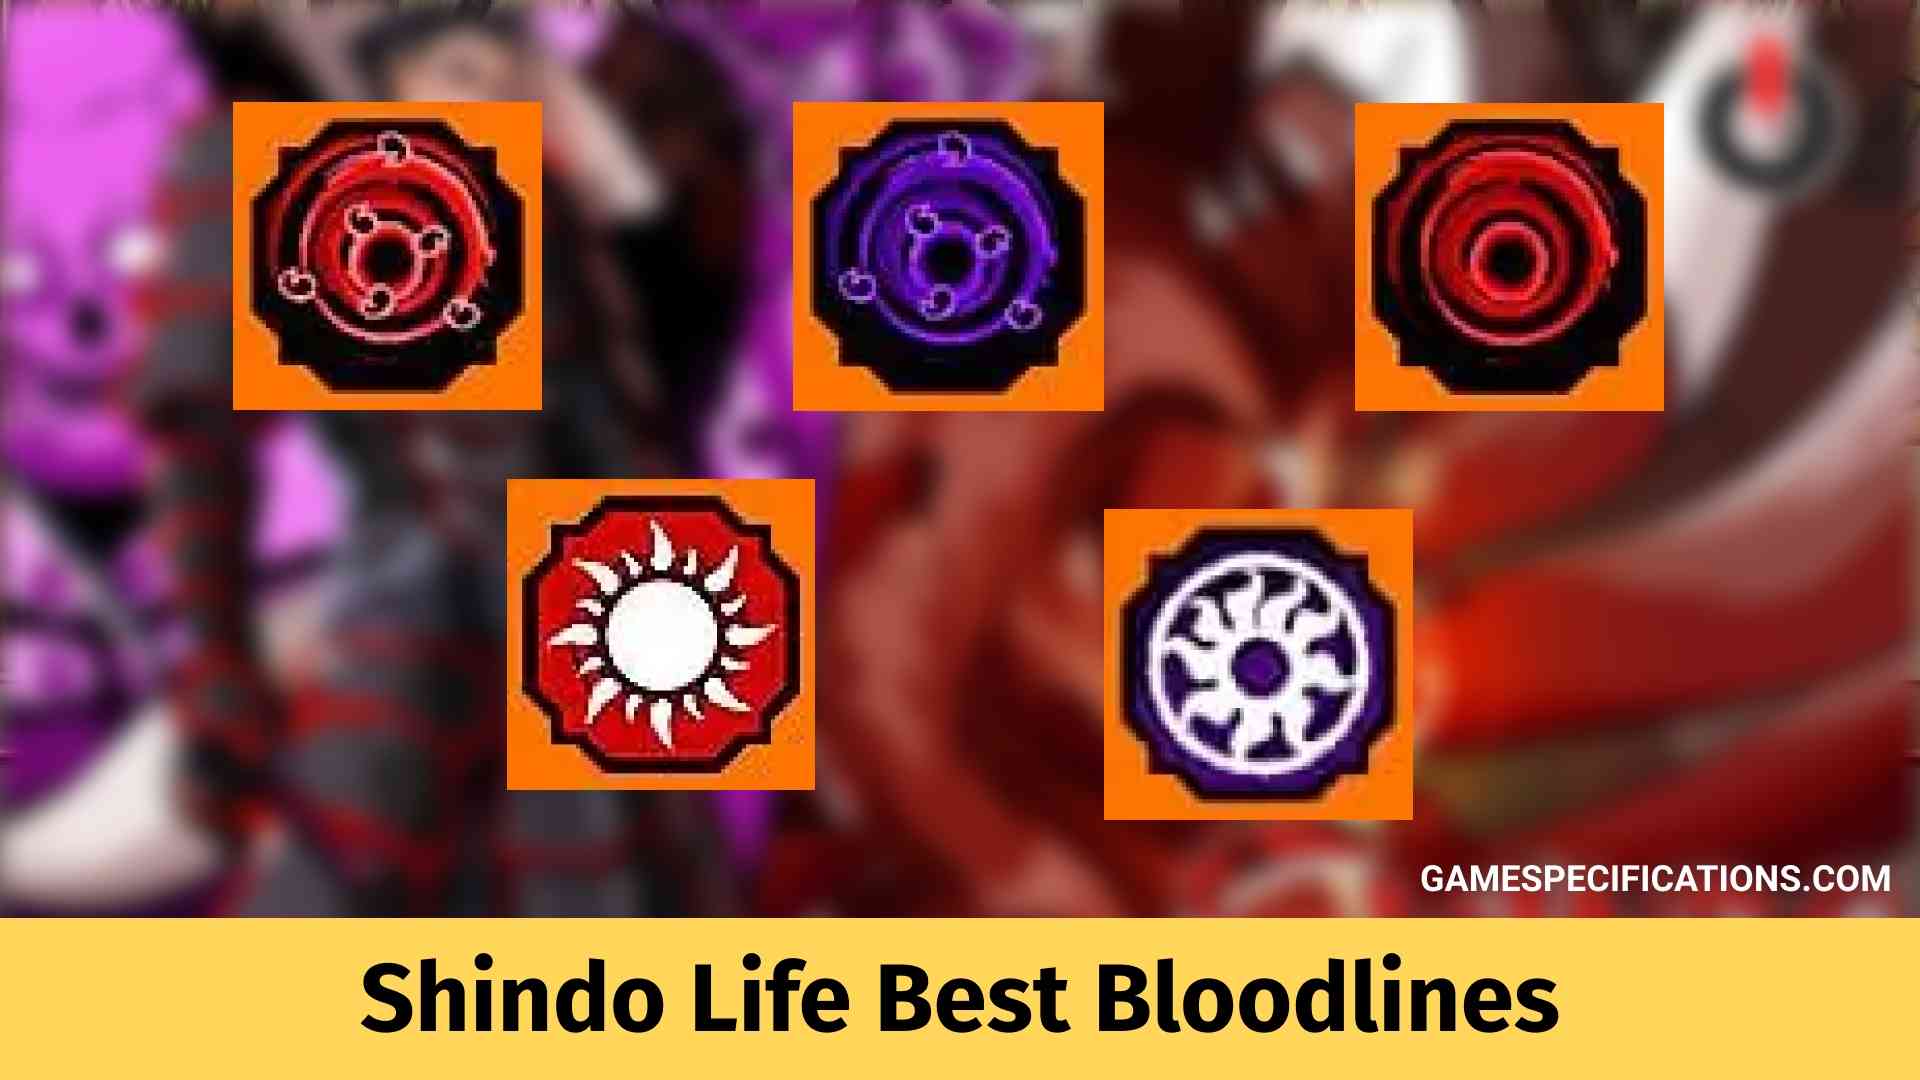 Whats the best bloodline and element in shindo so i can spin, i